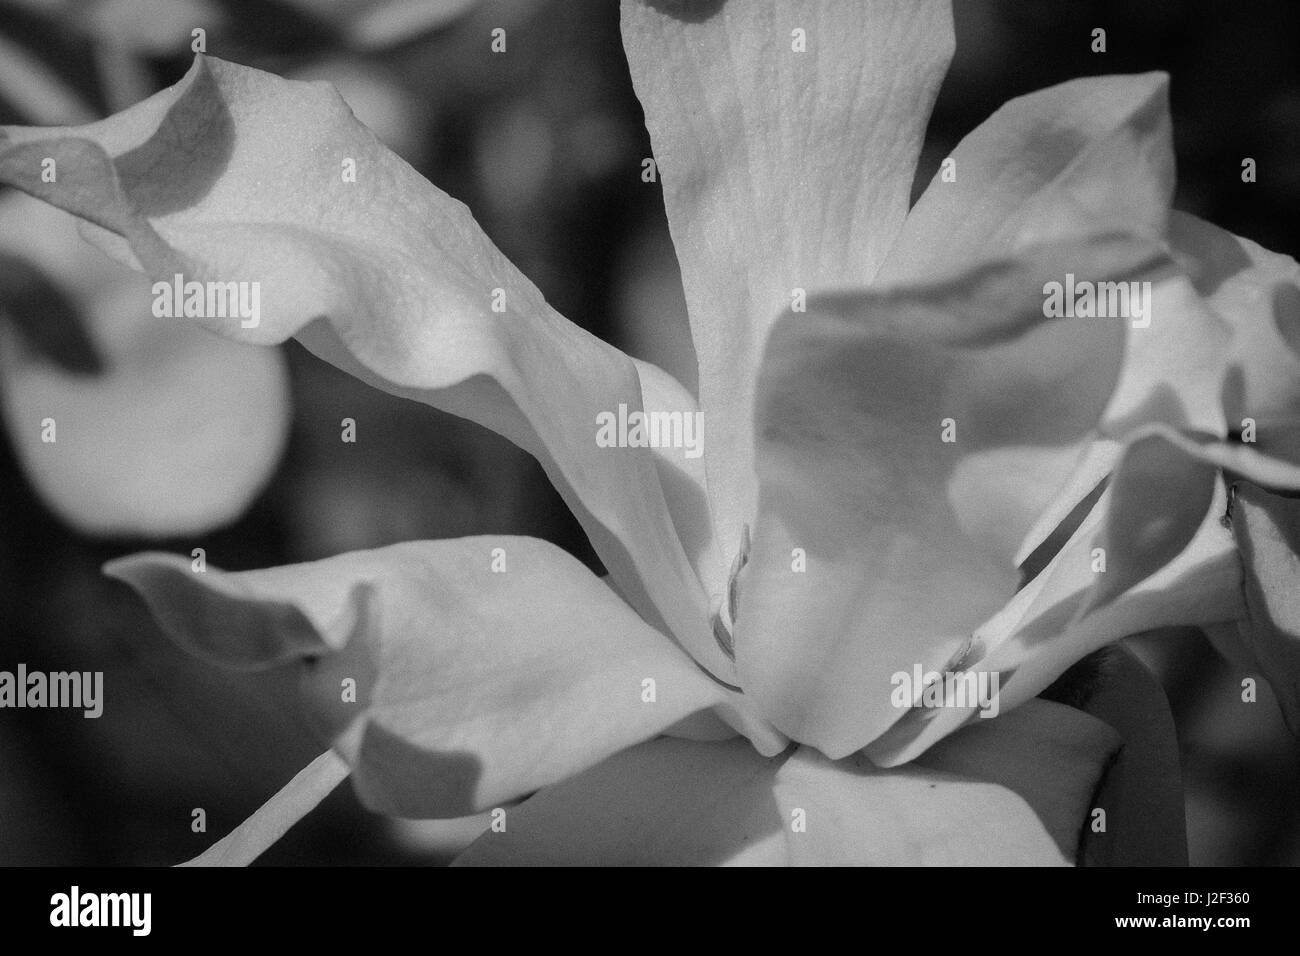 Flower. Black and white. Soft, white elegance of an early magnolia bloom. Stock Photo